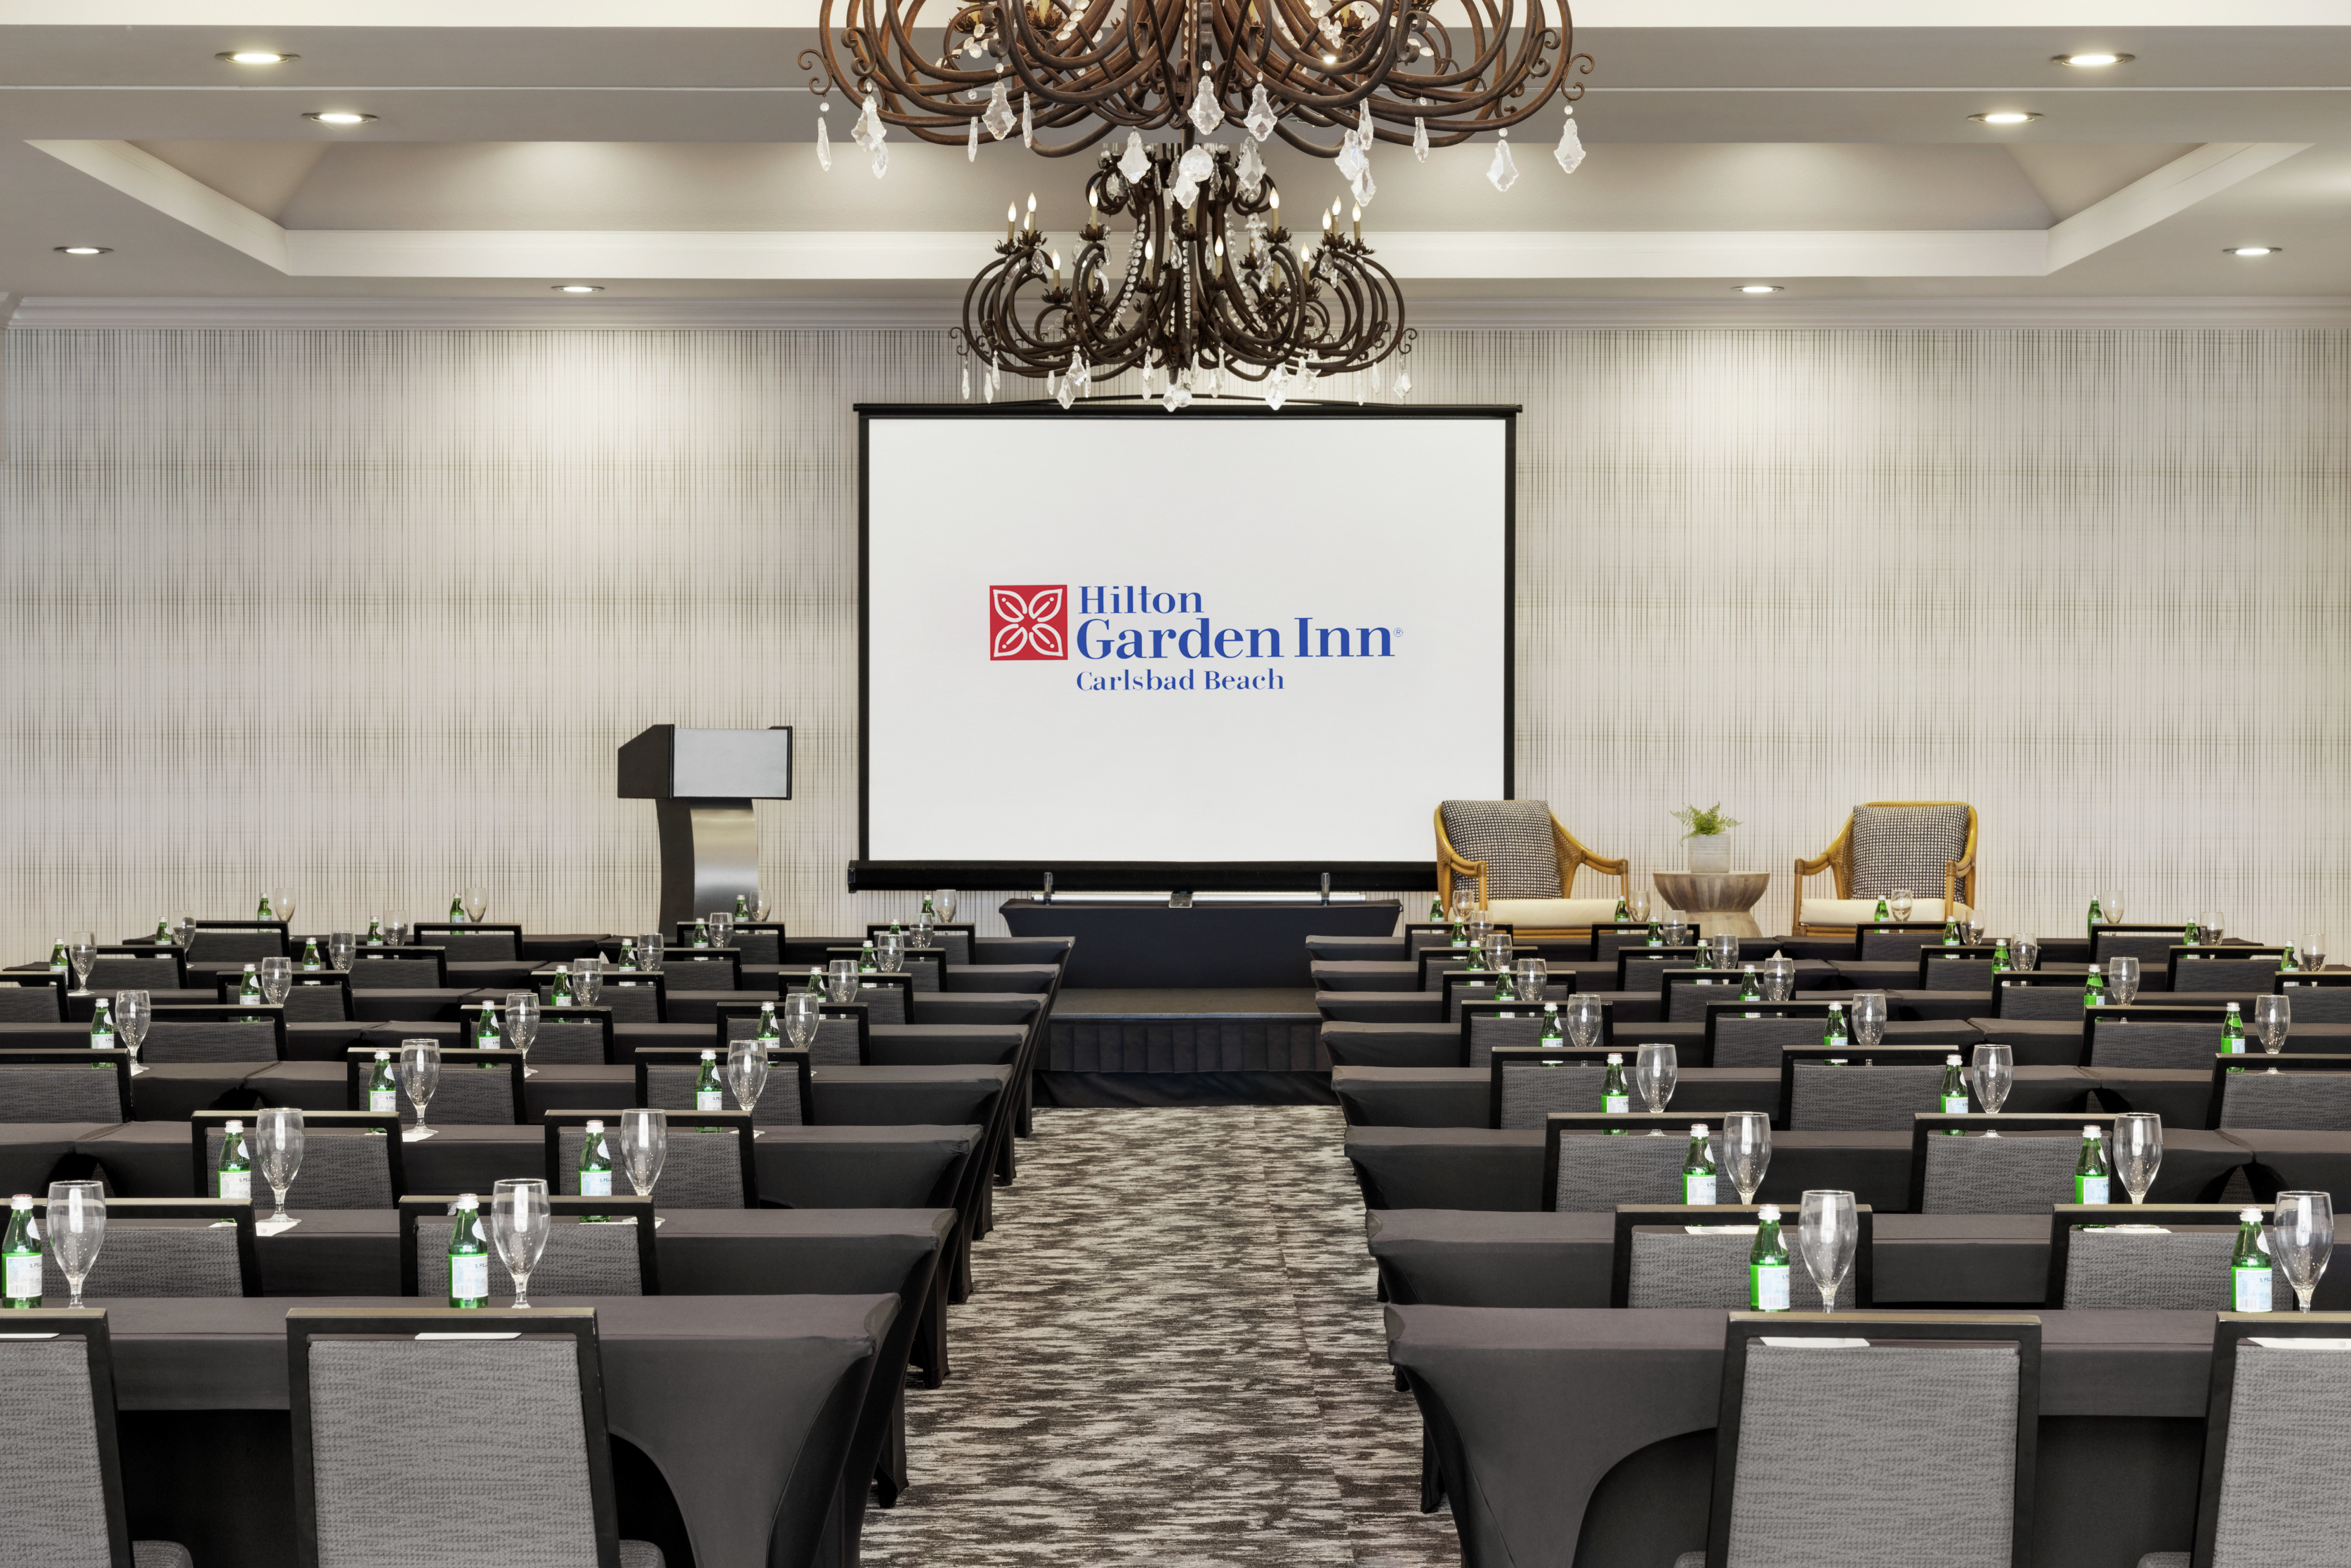 Spacious on-site ballroom featuring classroom style seating with stage, podium, and projector screen at front of room.